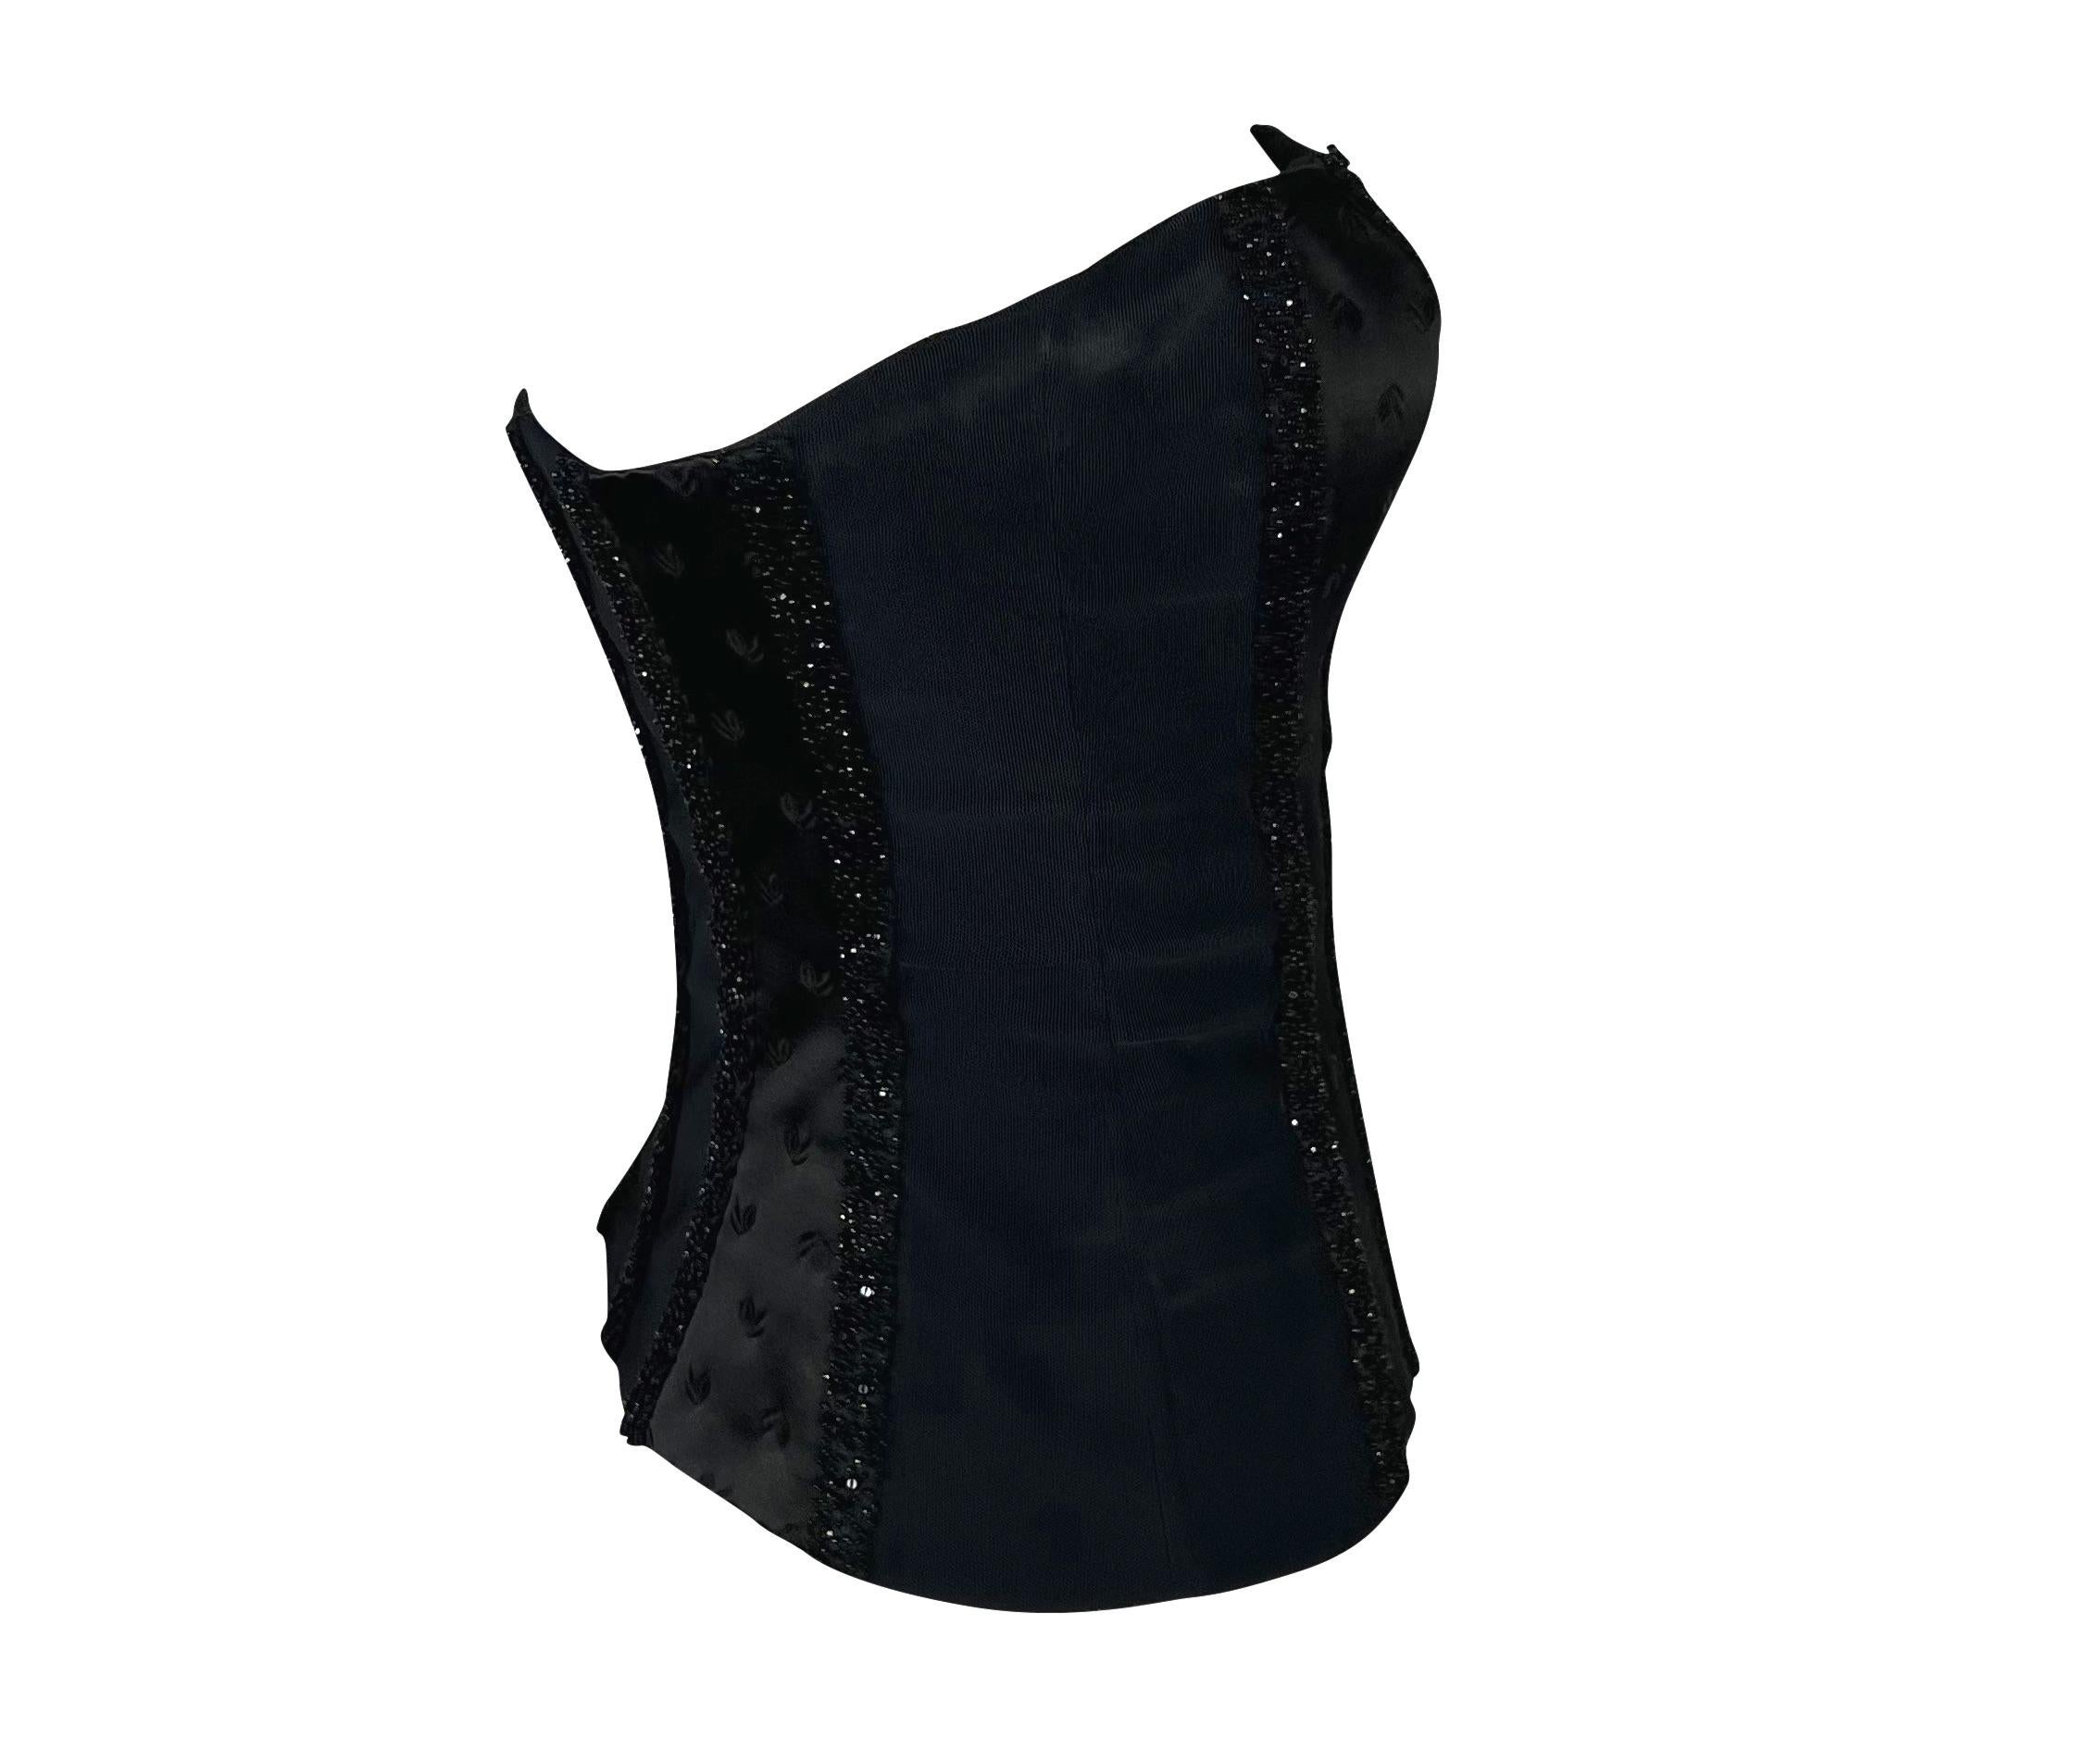 S/S 2001 Gianni Versace by Donatella Black Beaded Panel Bustier Corset Top For Sale 1